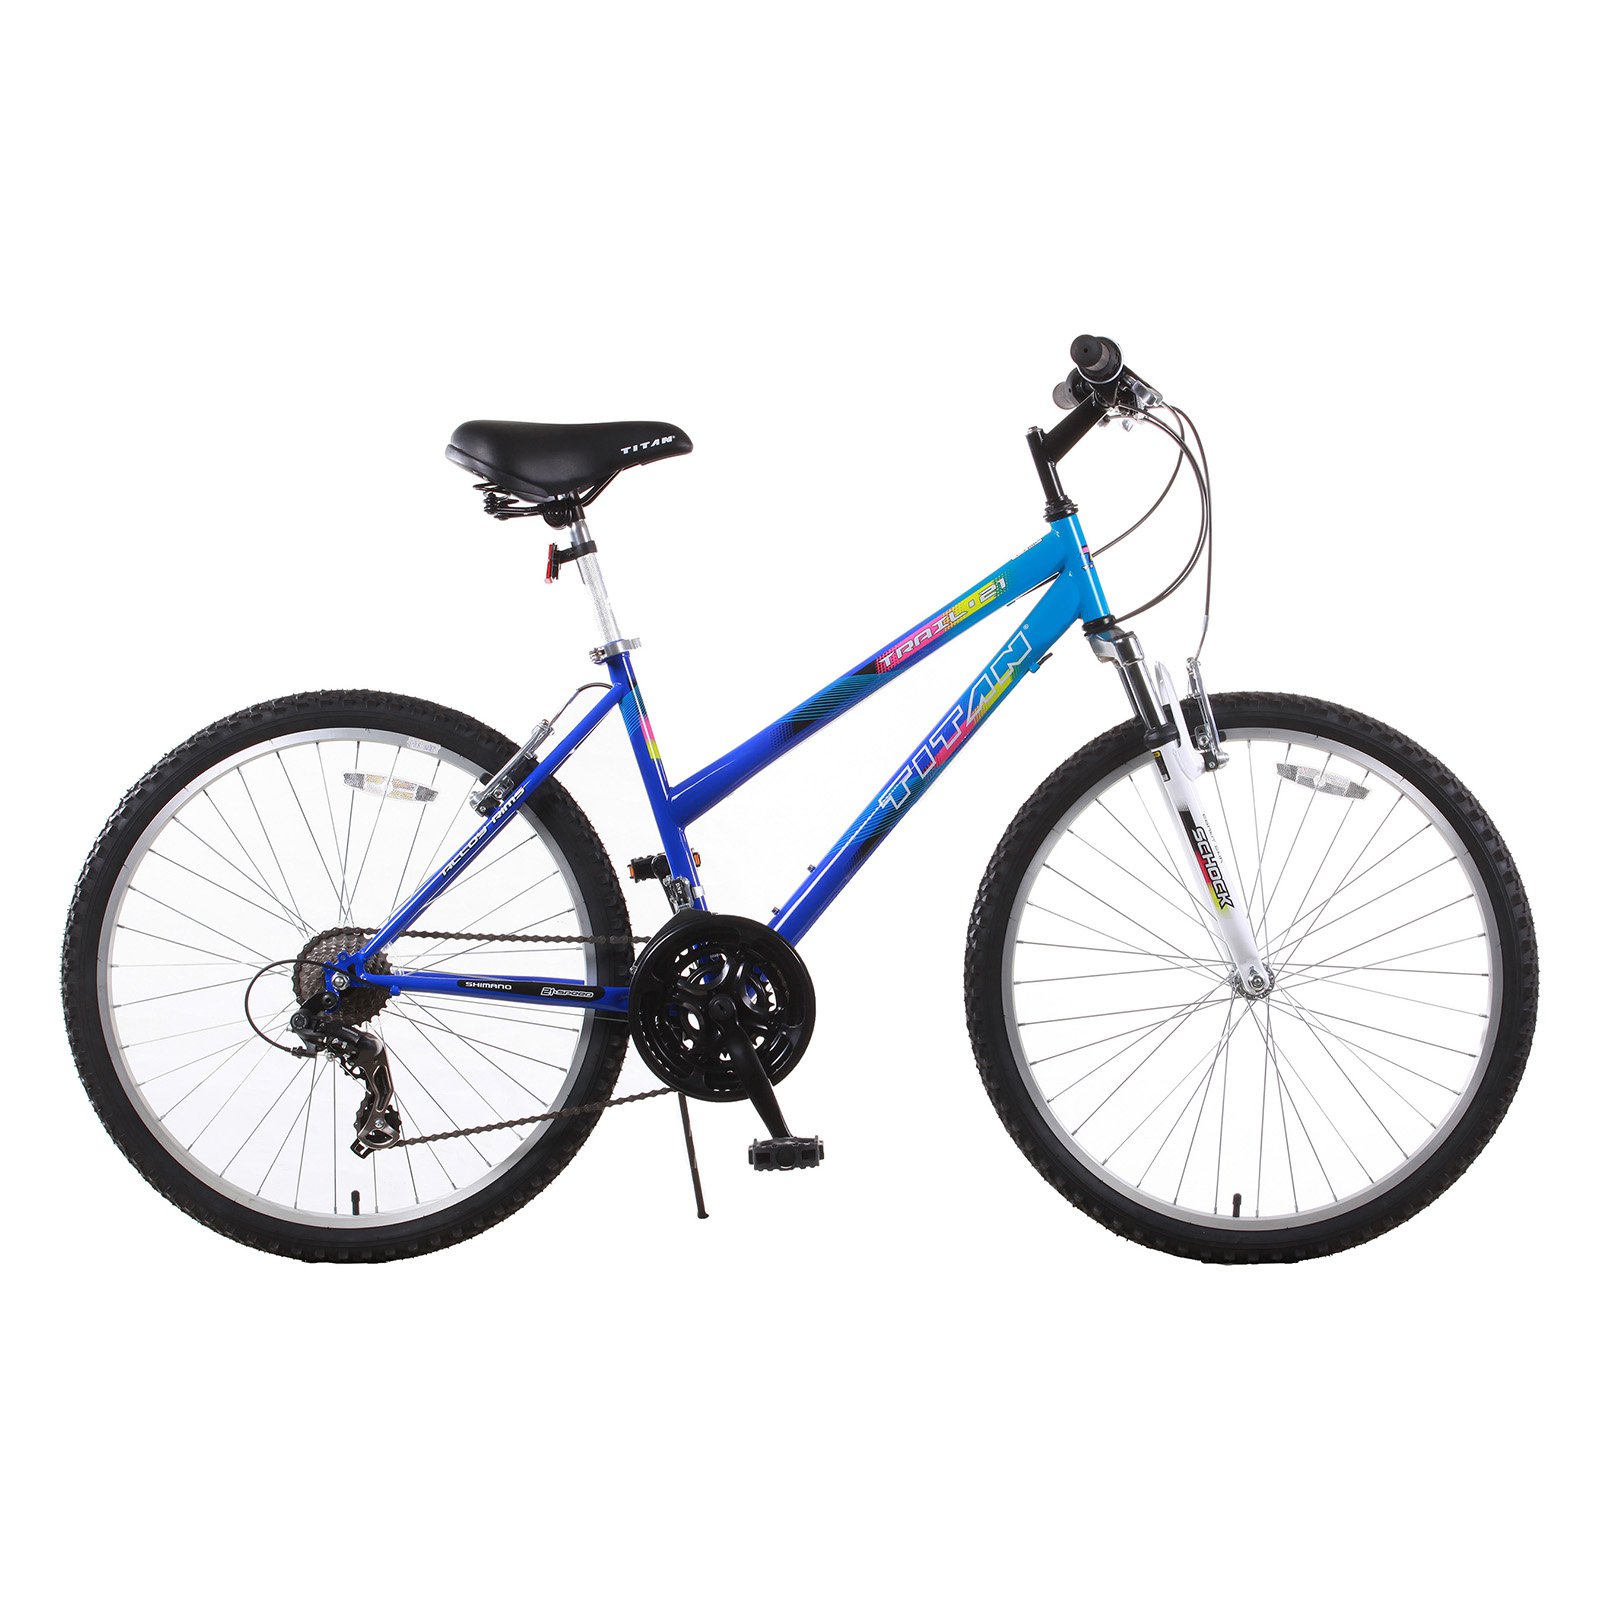 TITAN Trail 21-Speed Suspension Women's Mountain Bike with Front Shock, Blue - image 1 of 12